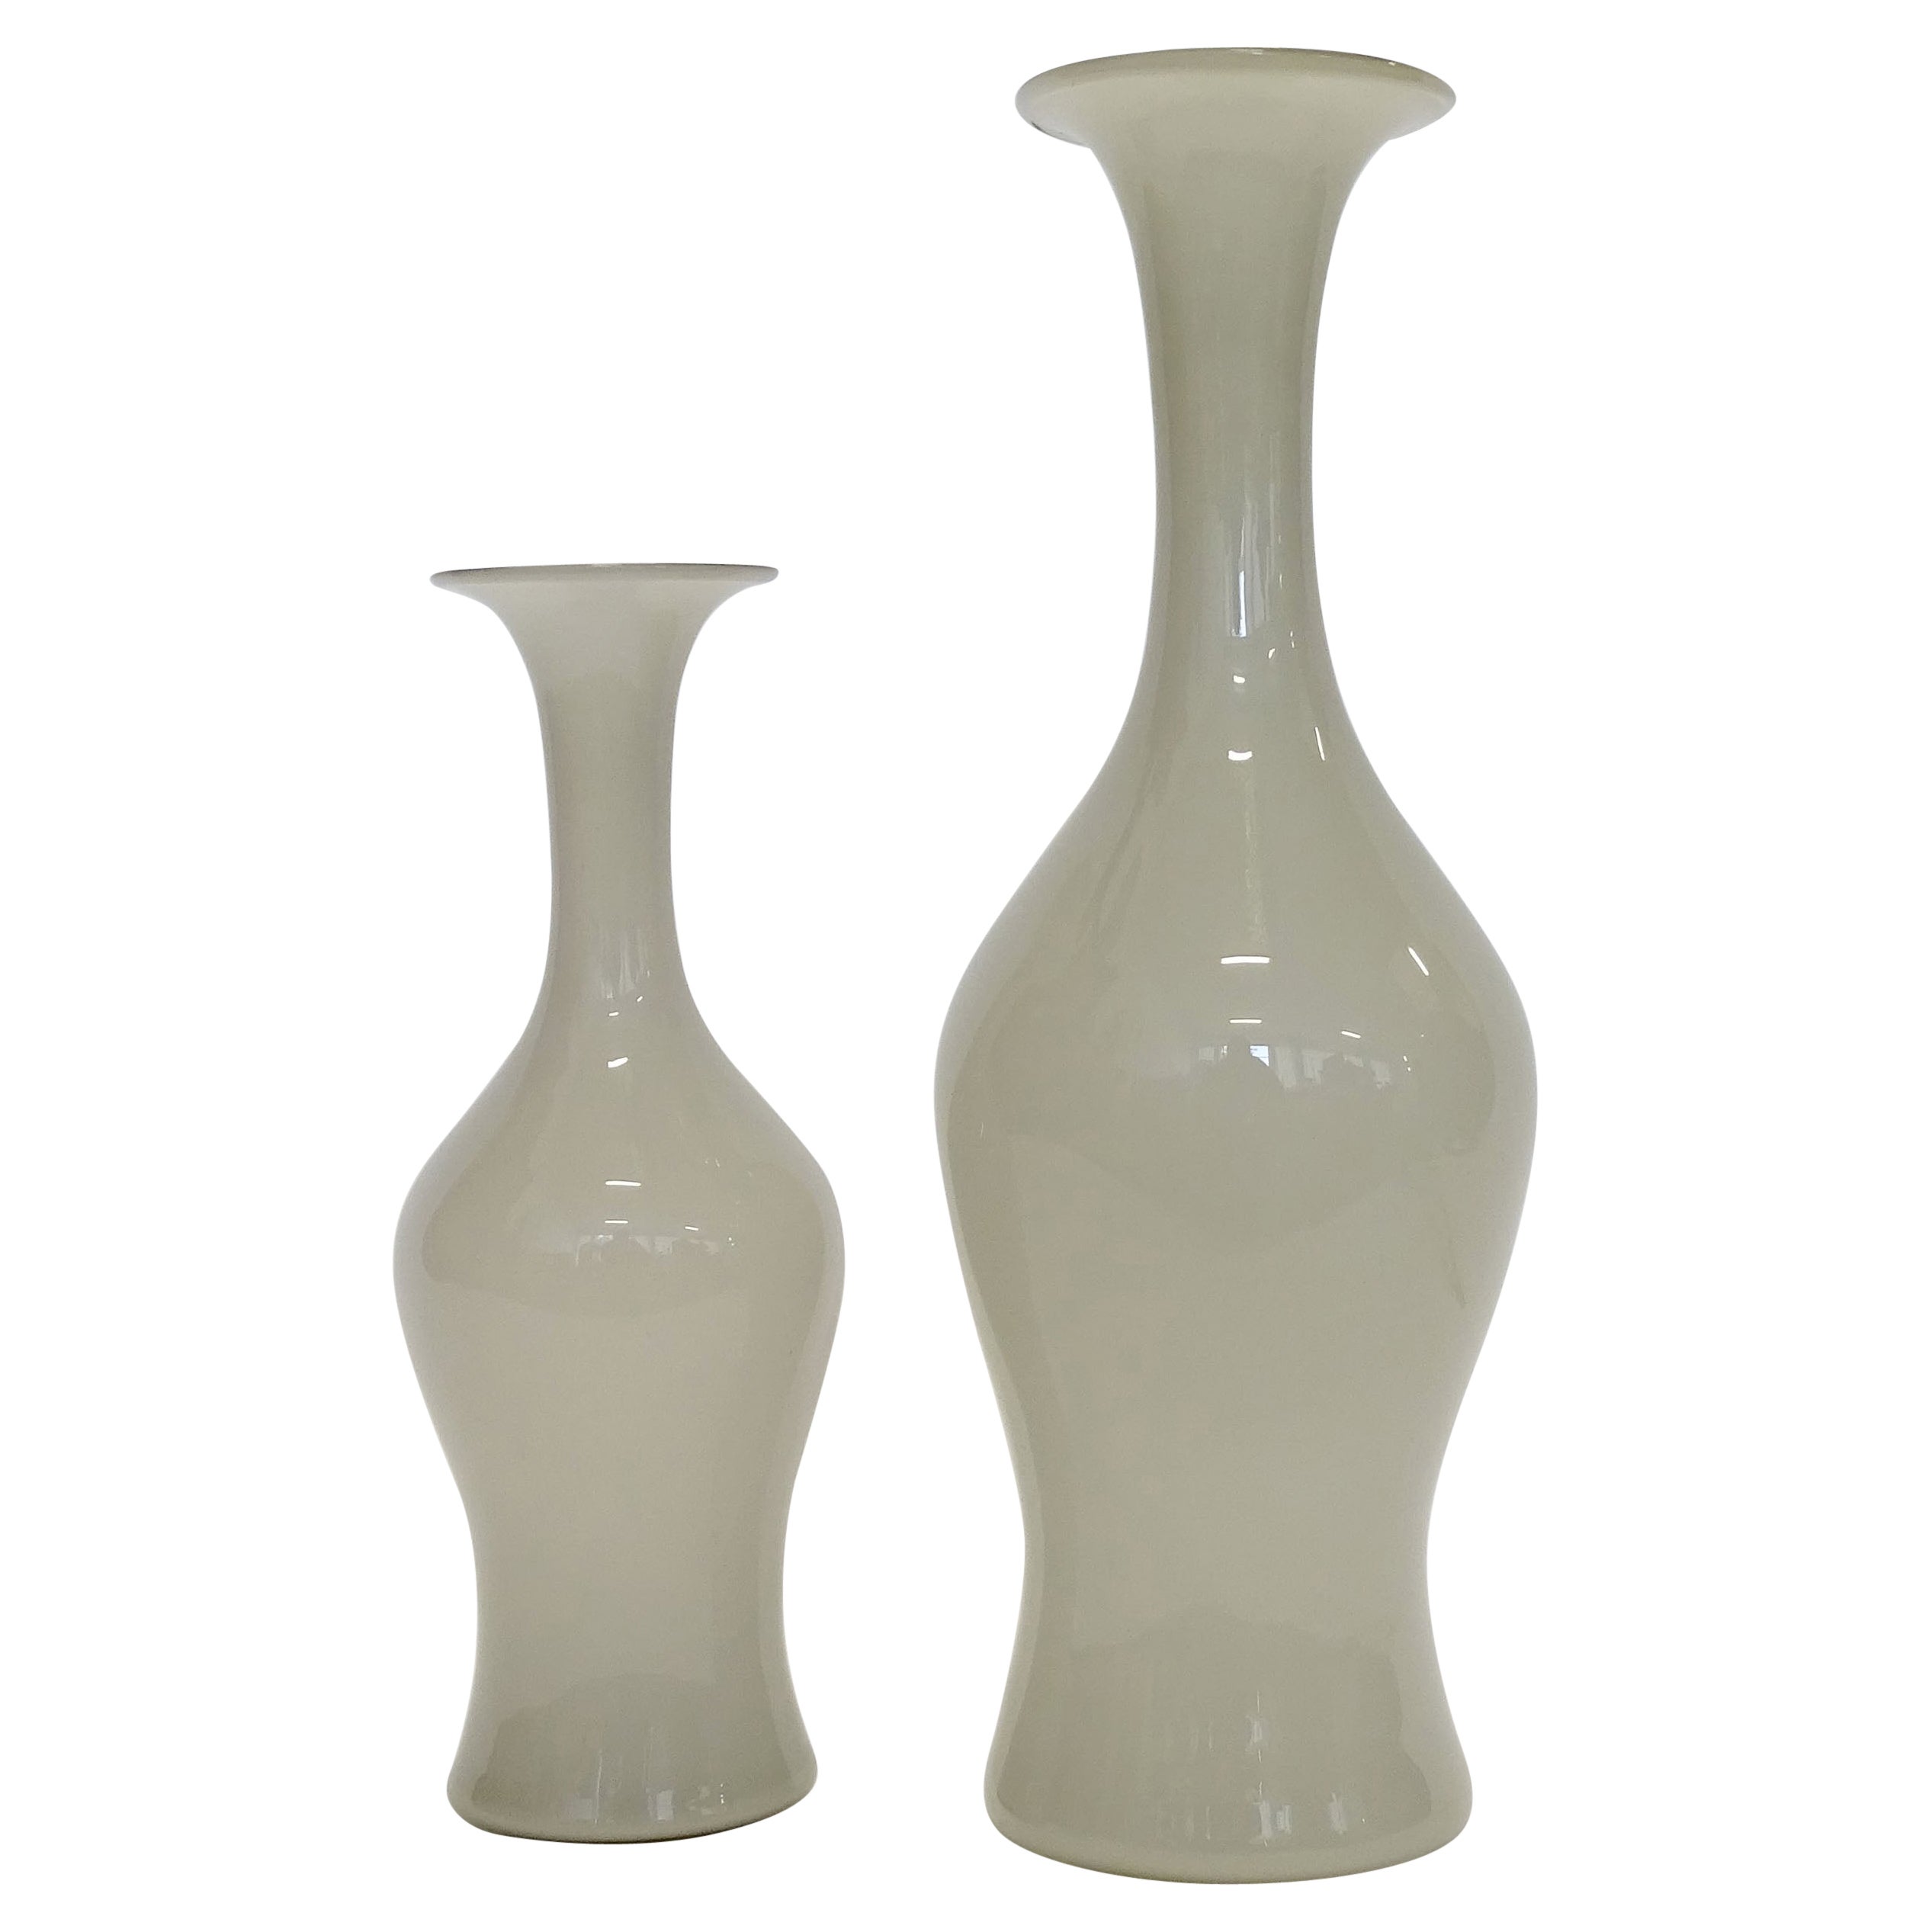 Paolo Venini Pair of Opalino Vases for Venini in Light Grey, Italy 1950s For Sale